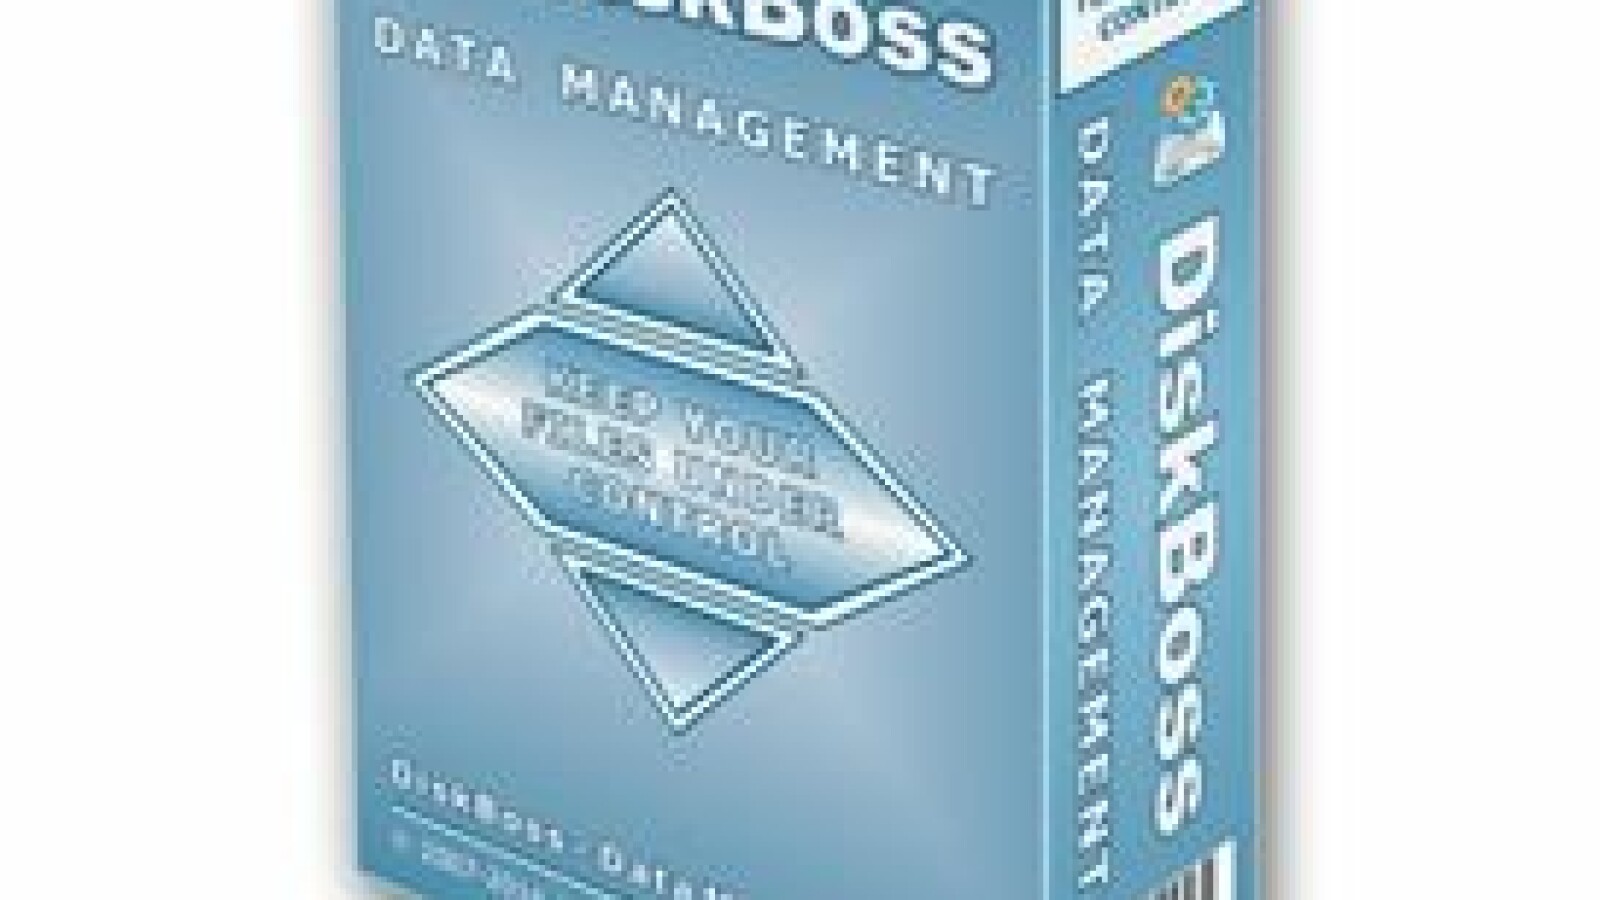 download the new for android DiskBoss Ultimate + Pro 14.0.12